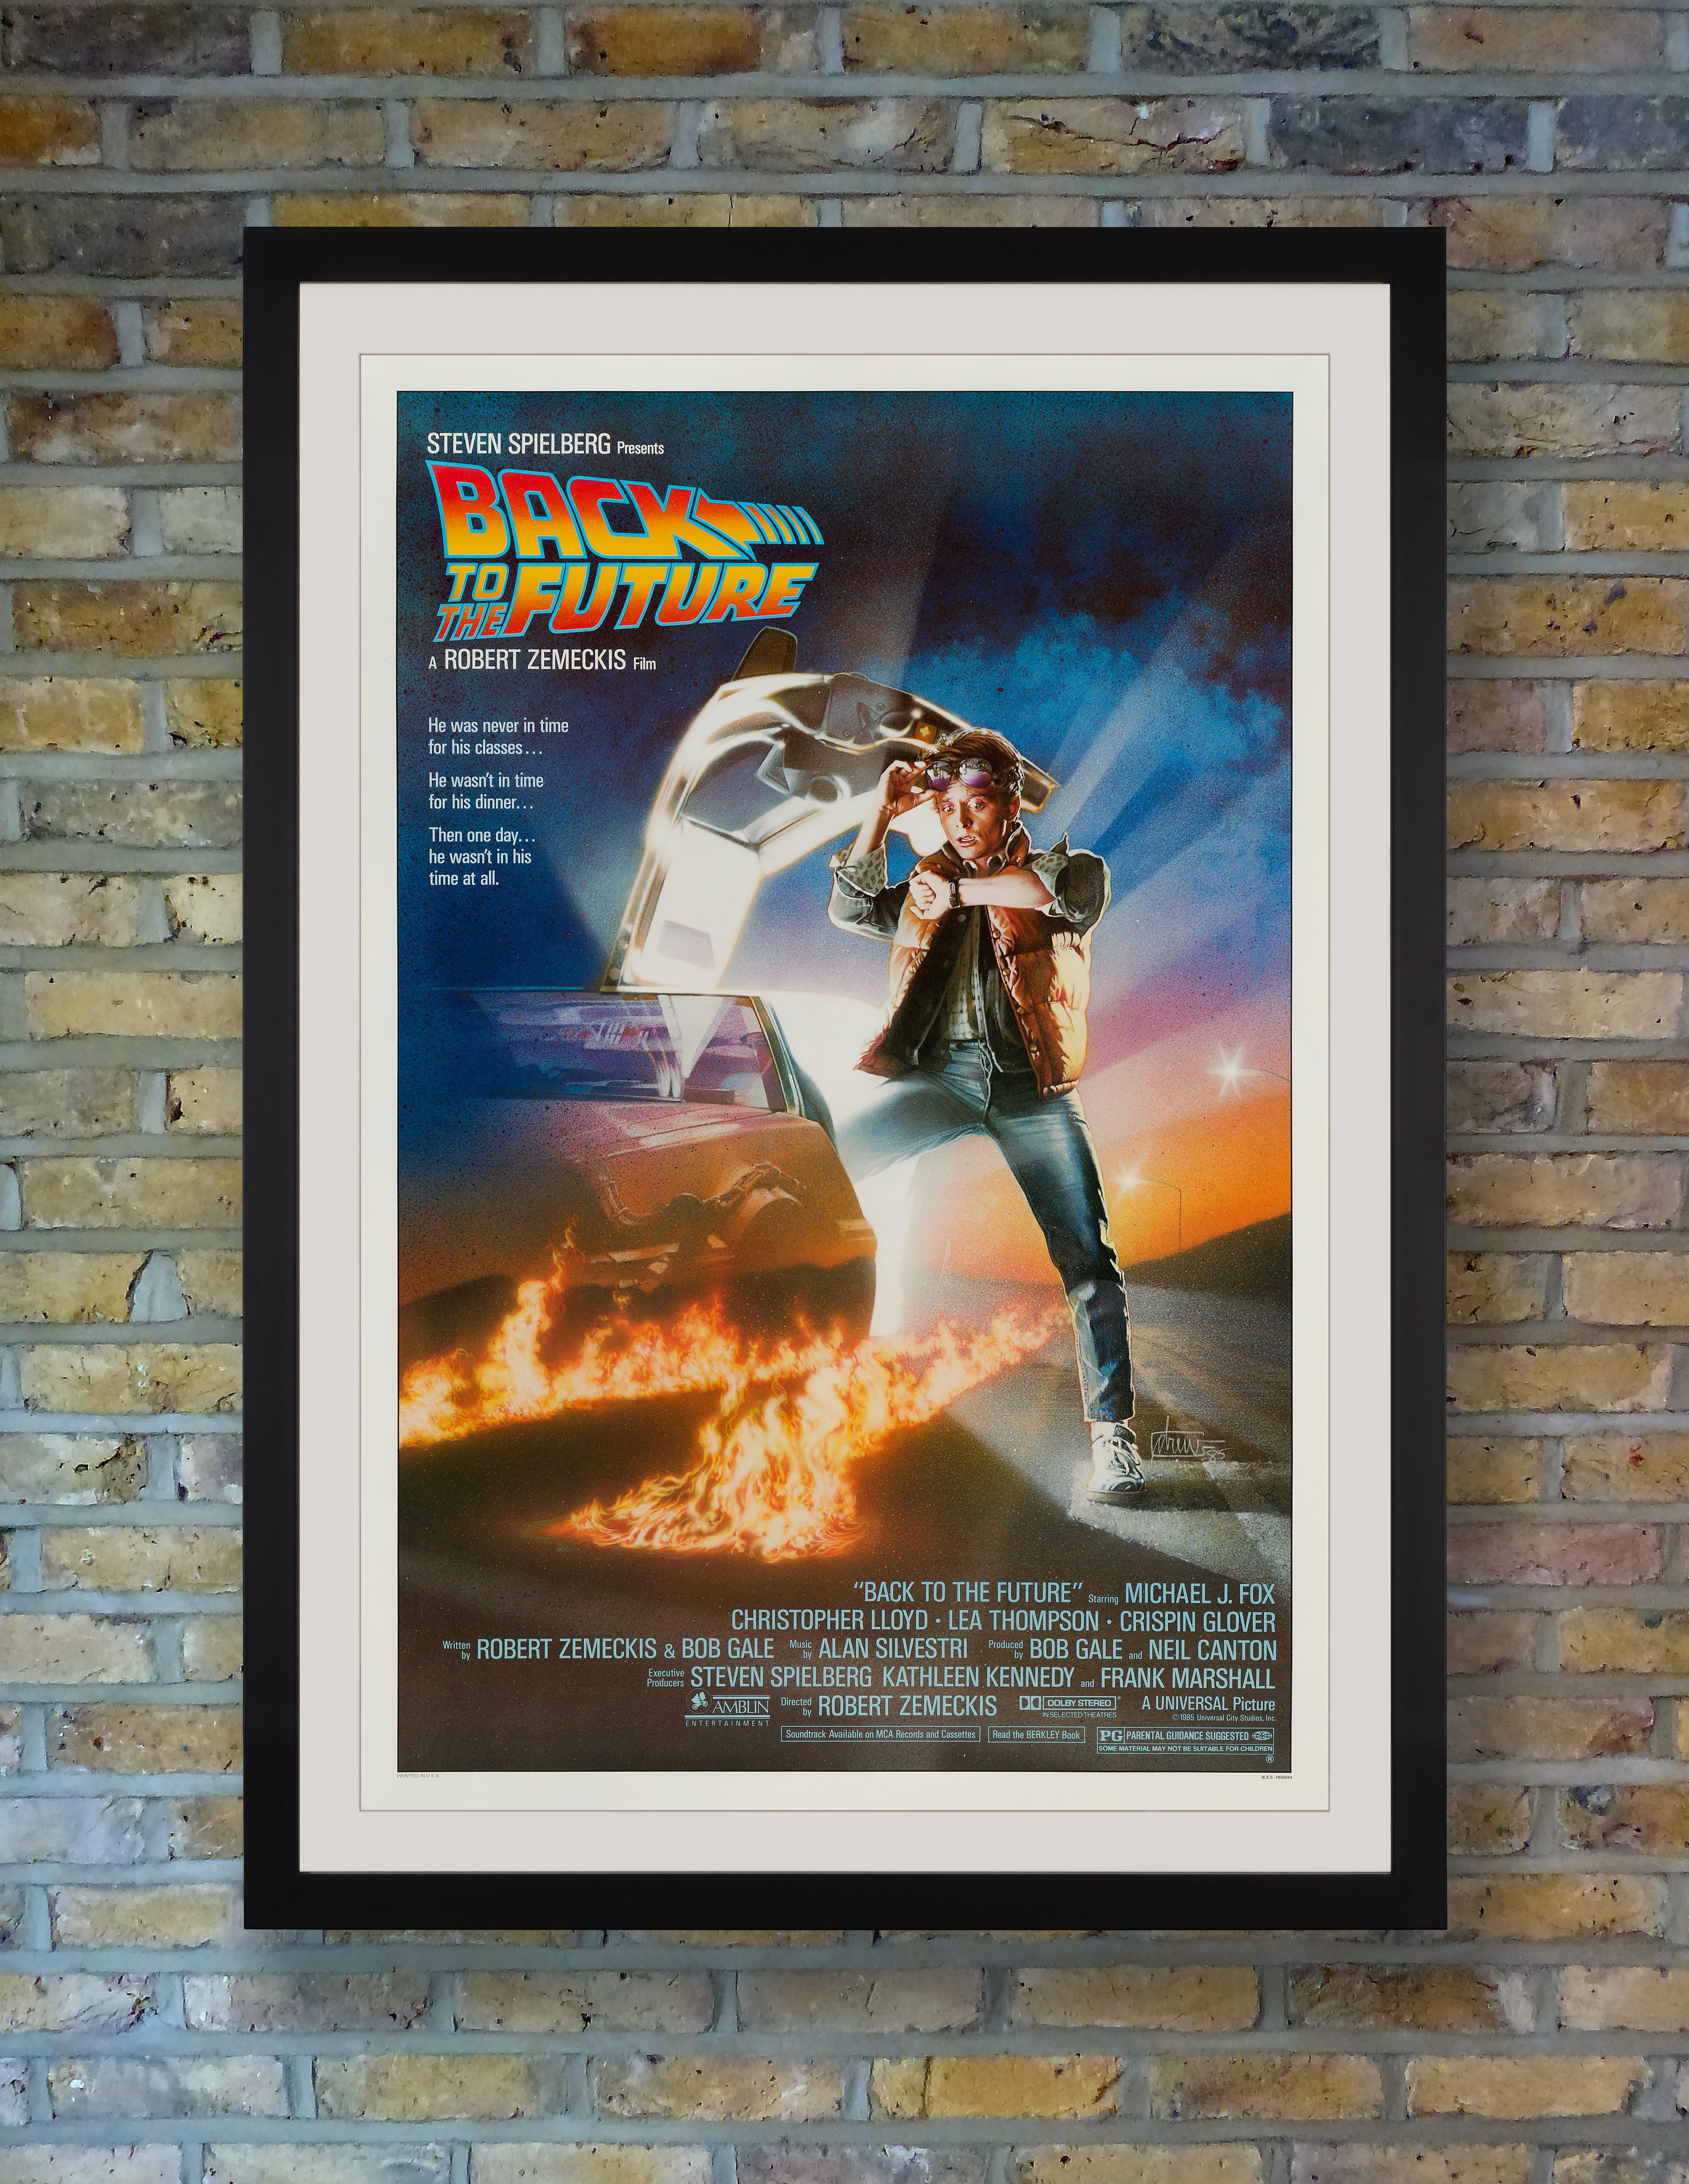 A beloved American blockbuster, Robert Zemeckis' 1985 sci-fi adventure 'Back to the Future' starred Michael J. Fox as teenager Marty McFly, blasted back to 1955 in the plutonium-powered DeLorean time machine created by eccentric scientist Doc Brown.